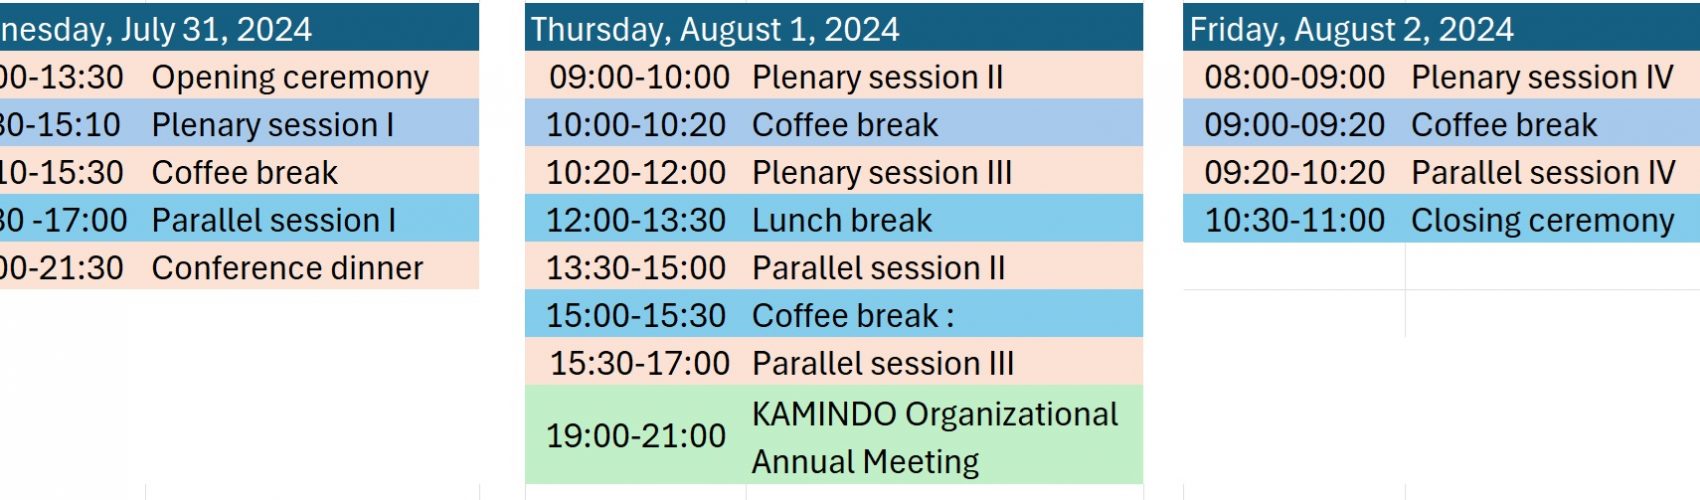 Schedule ICONMAA17